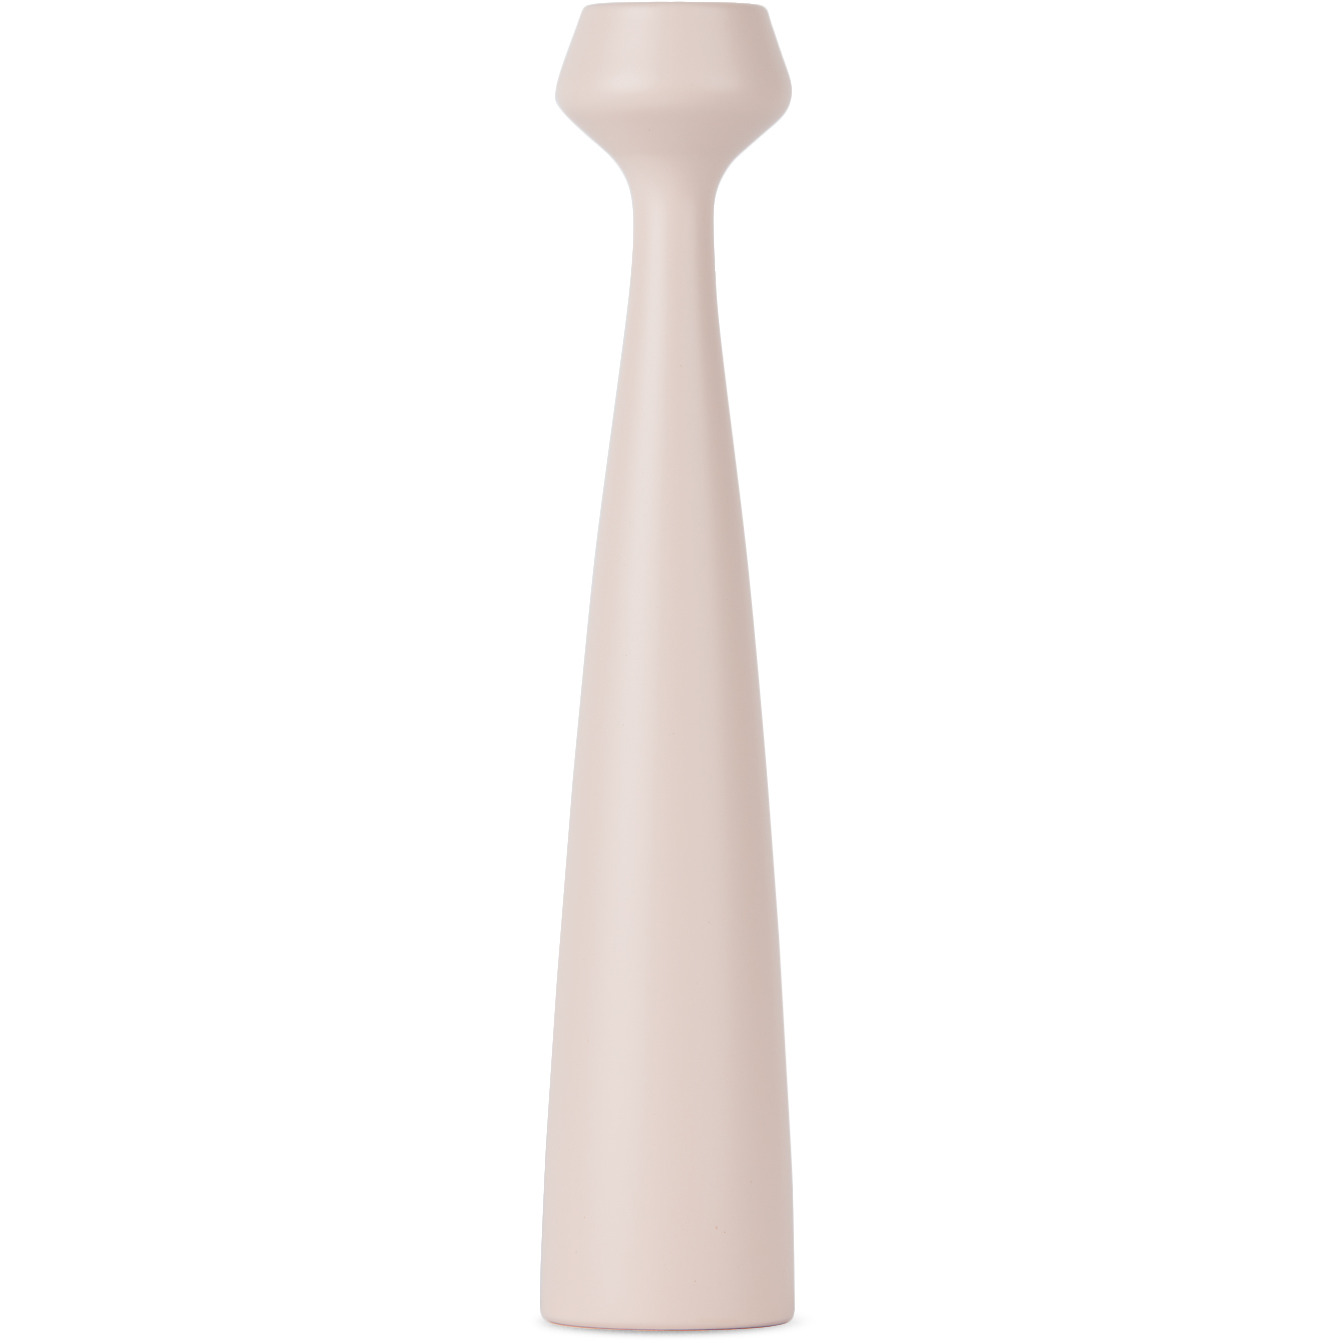 applicata Pink Lily Candle Holder - image 1